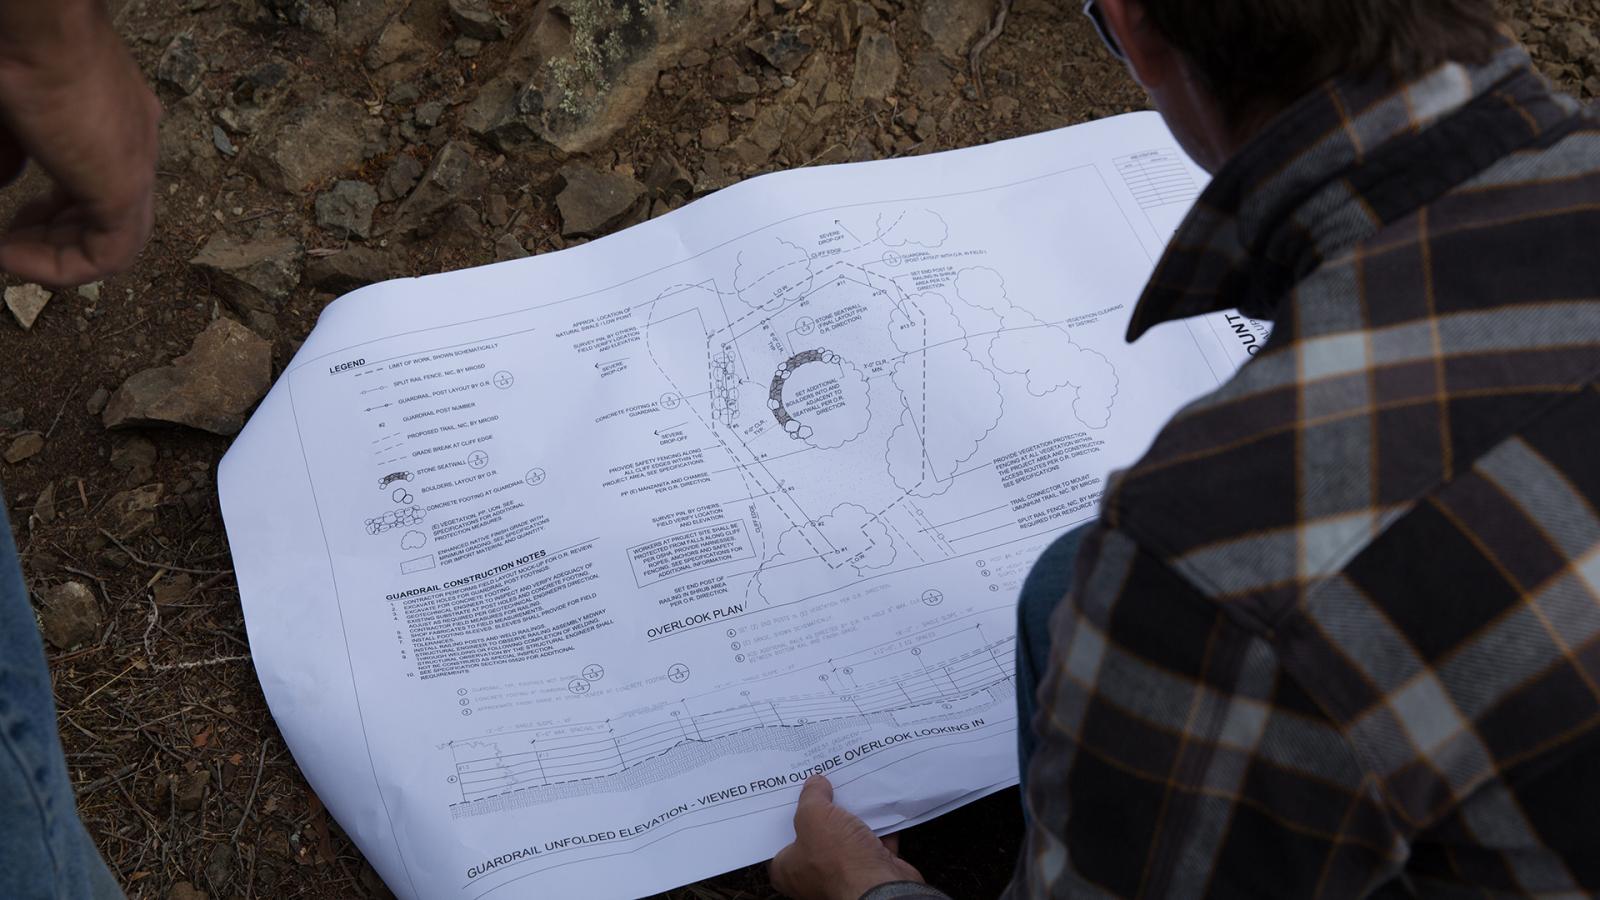 a person looking at a construction drawing